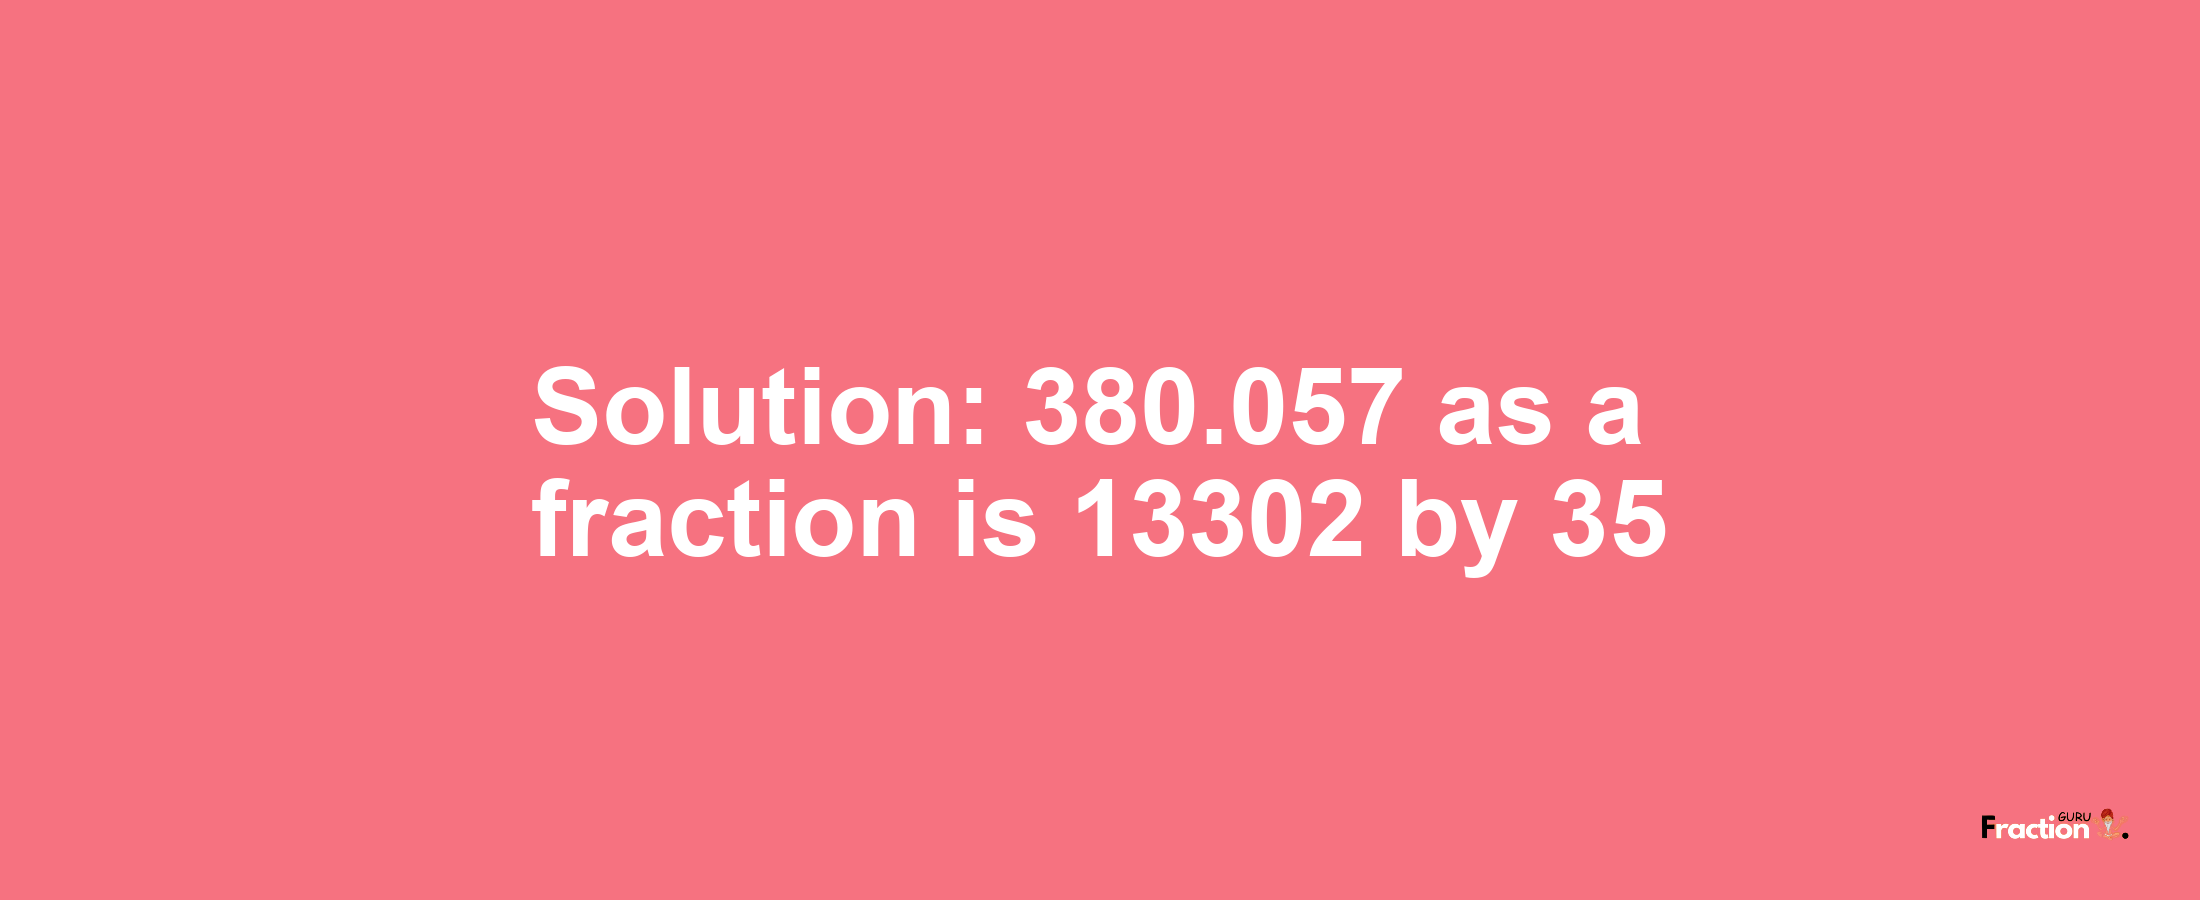 Solution:380.057 as a fraction is 13302/35